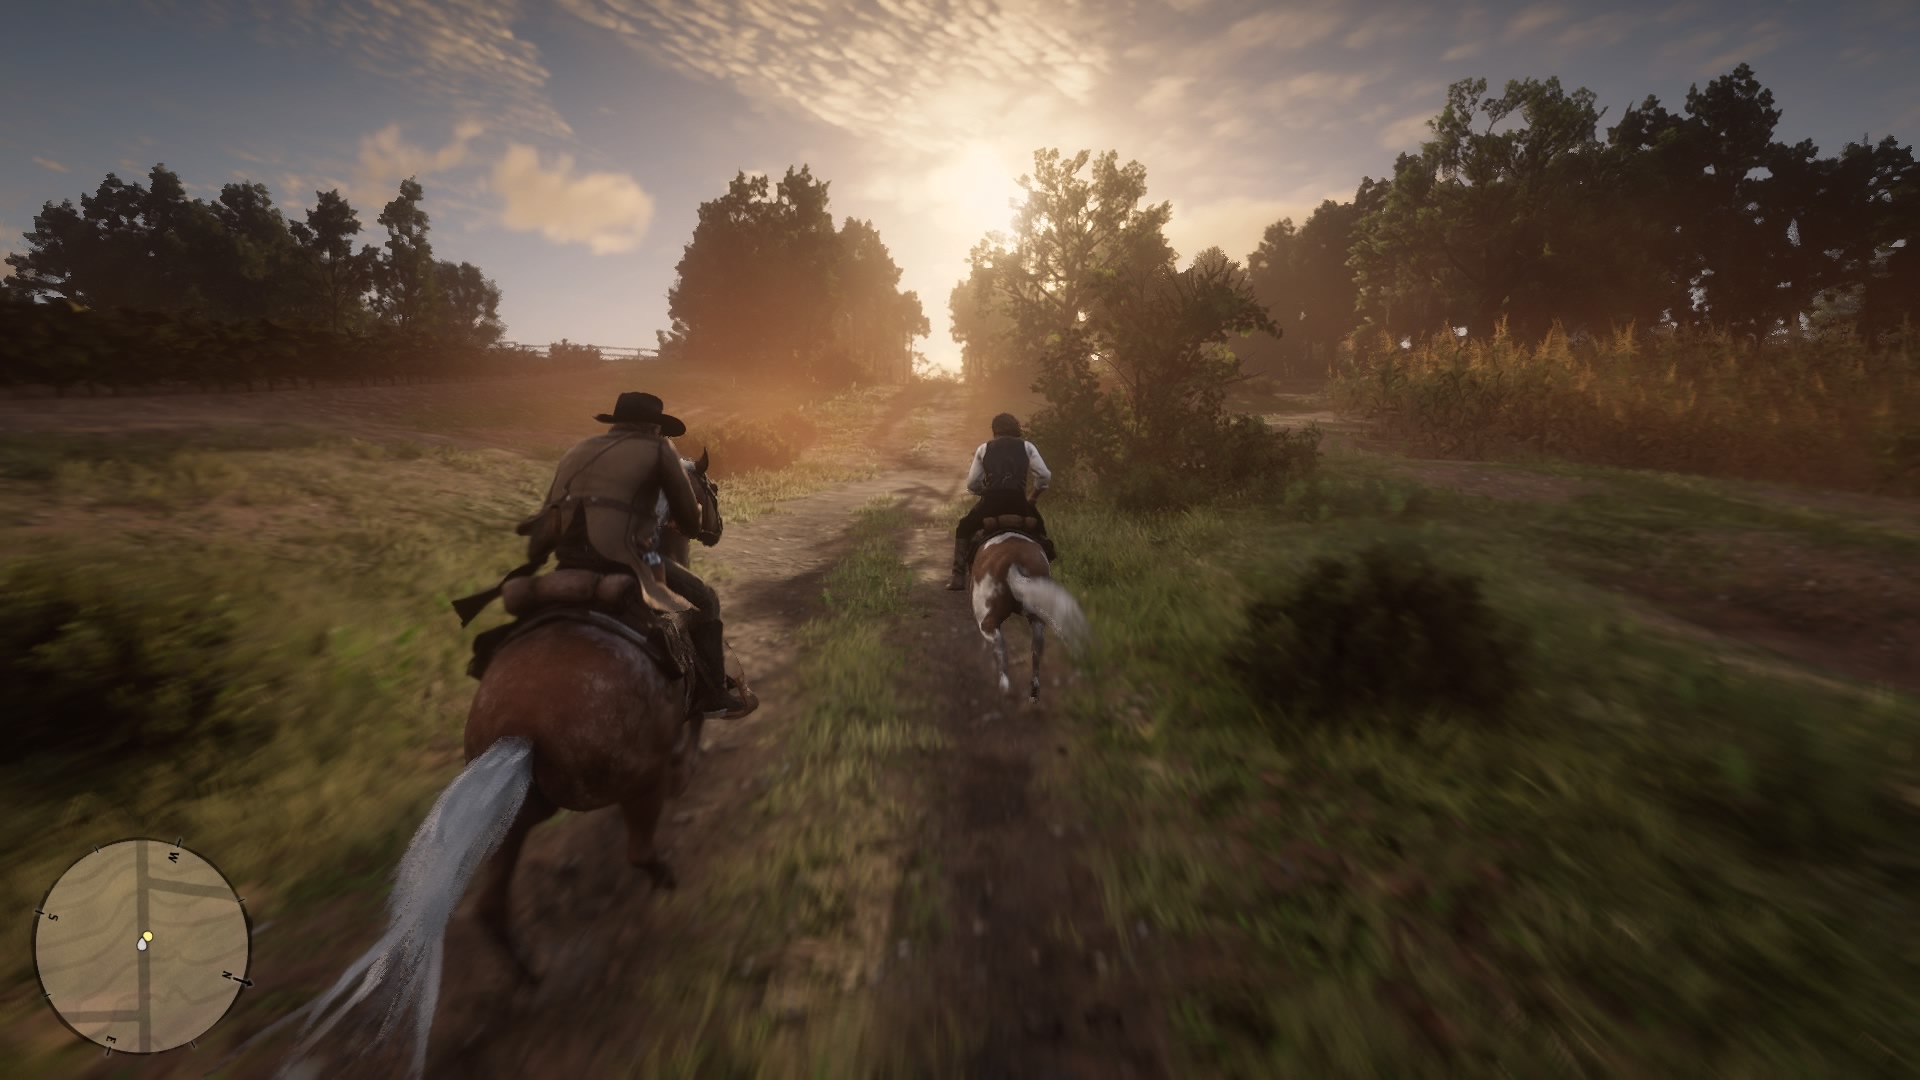 Red Dead Redemption 2 on PC review: The game now works and it's beautiful